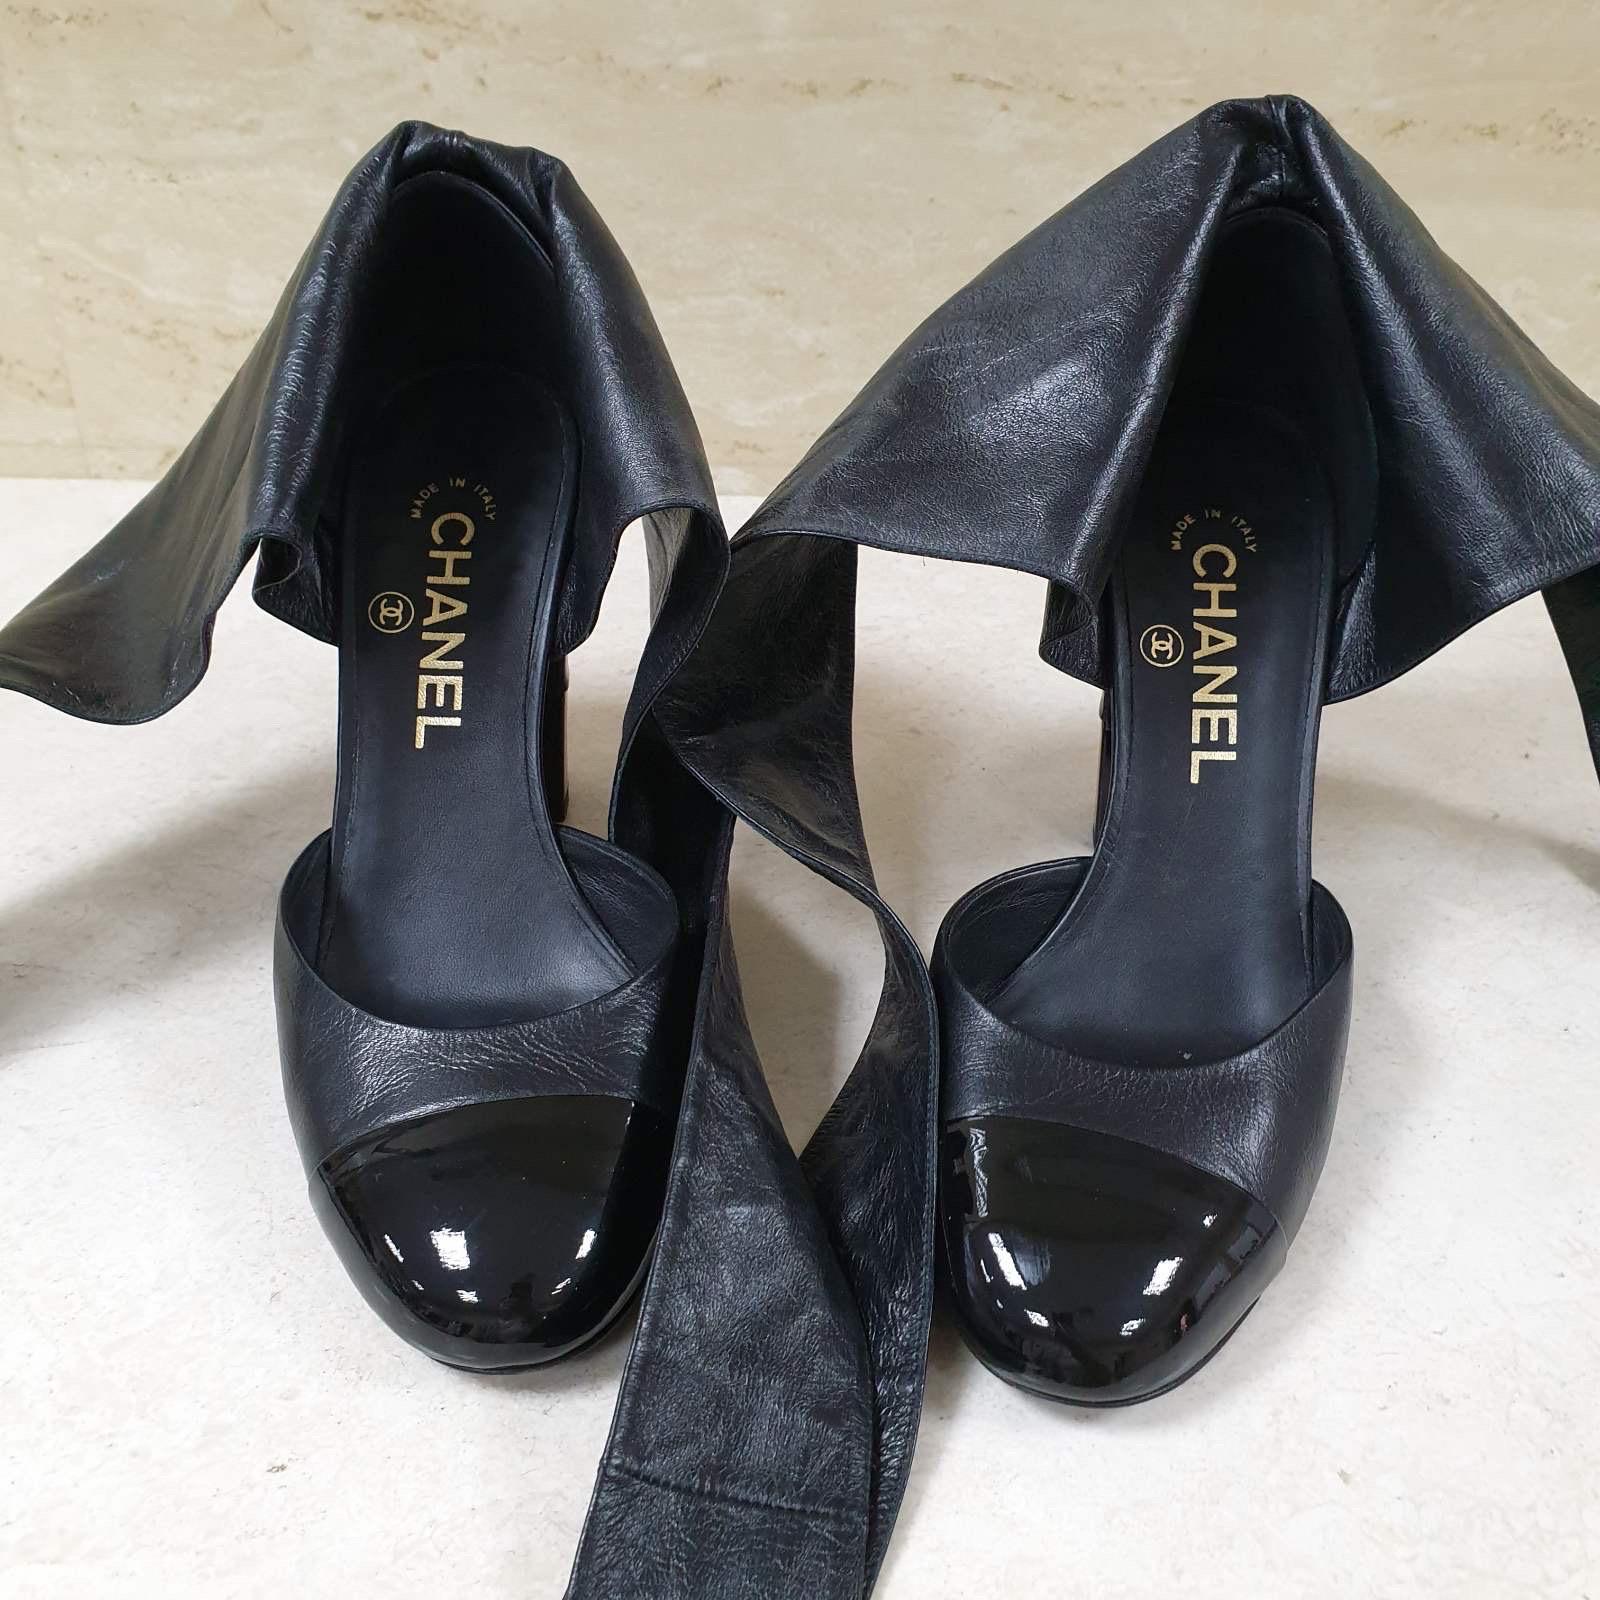 Chanel Black Leather Lace Up Heeled Sandals In Good Condition For Sale In Krakow, PL